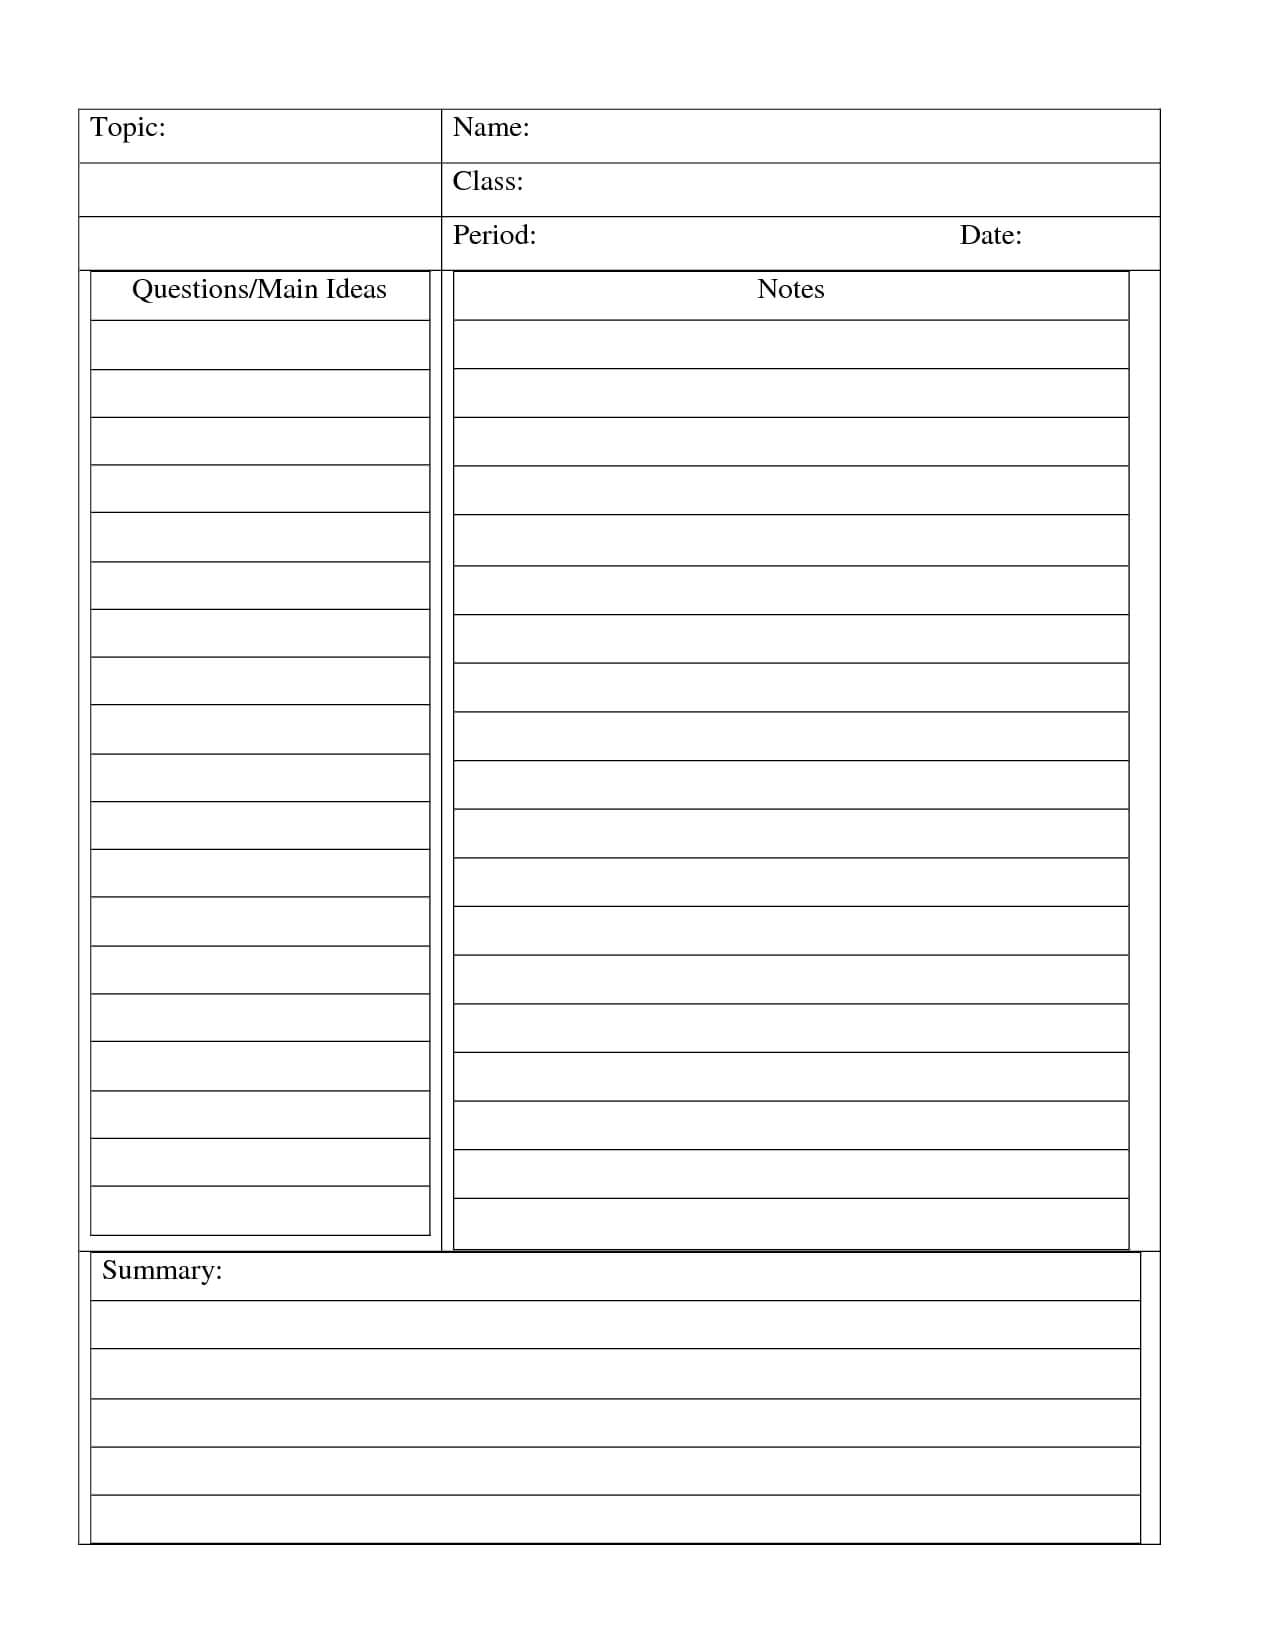 Cornell Method Template – Google Search | Cornell Notes Inside Note Taking Template Word